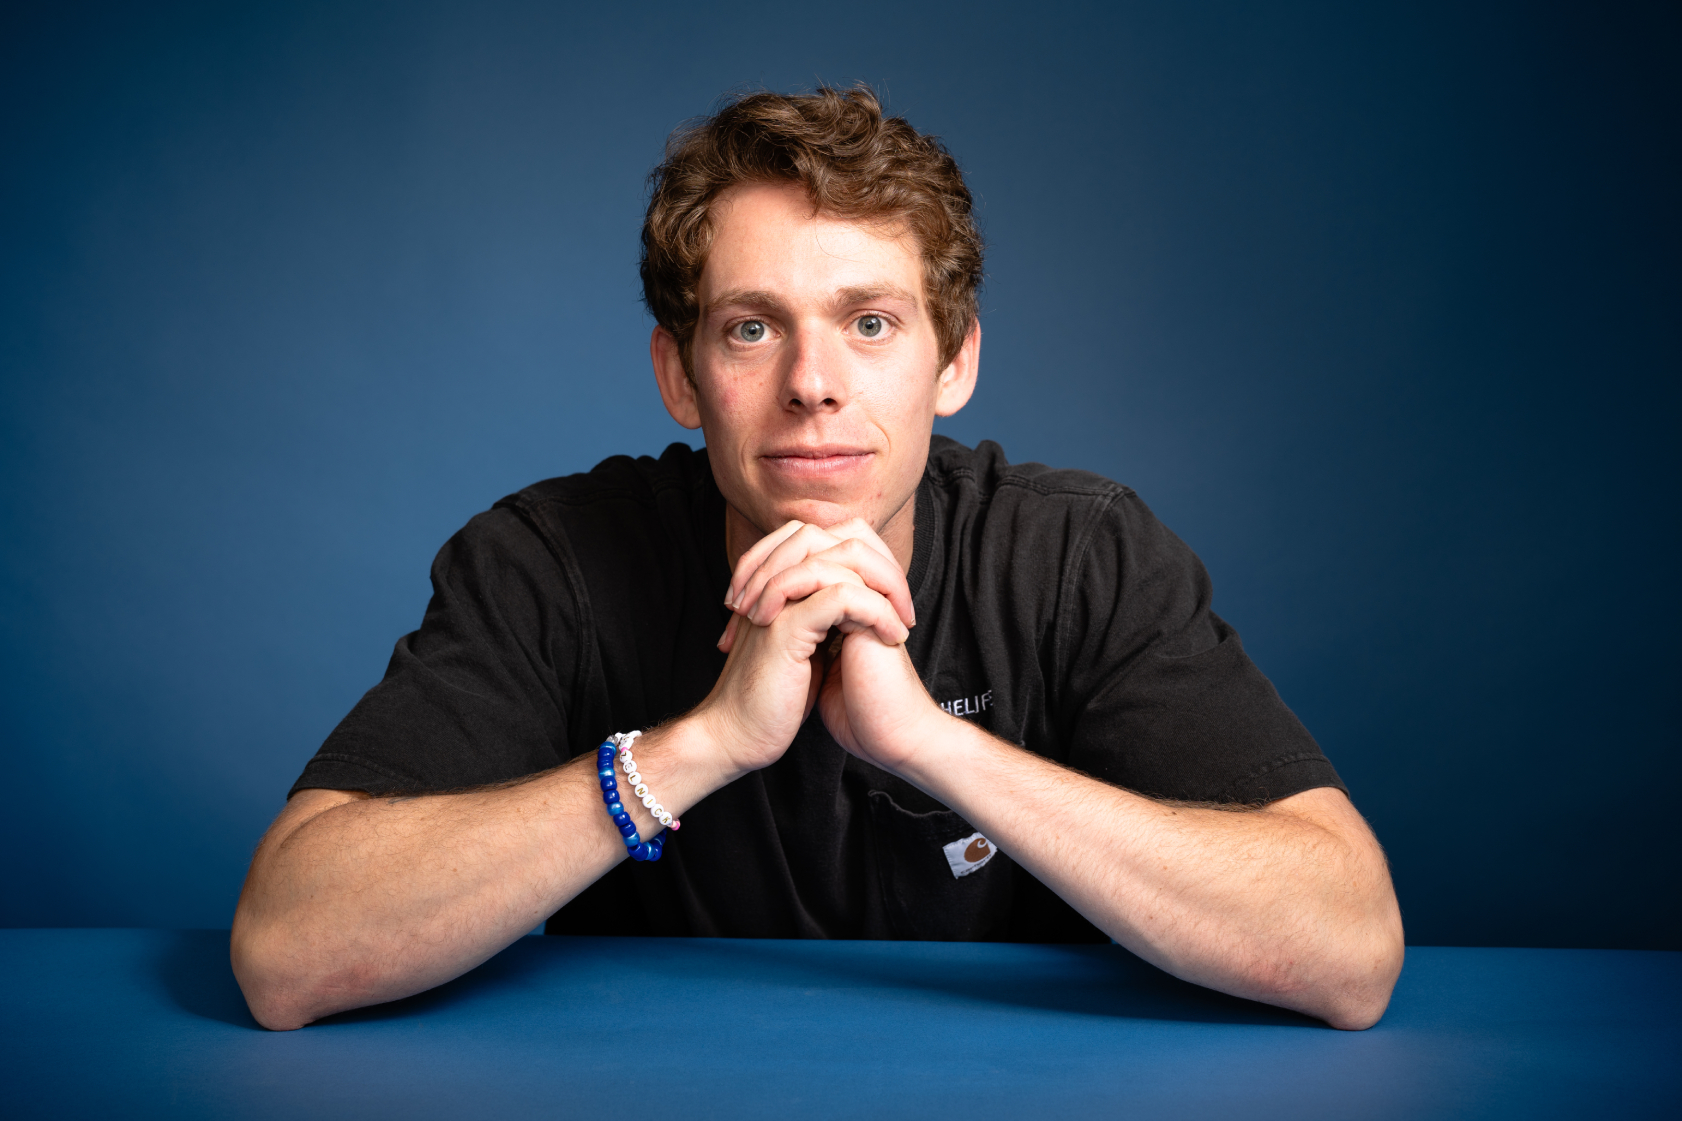 Portrait of Lucas Zelnick, a white man in his 20s, wearing a black t-shirt. His hands are folded under his chin. The backround and table on which he is leaning are blue. He has light brown hair.